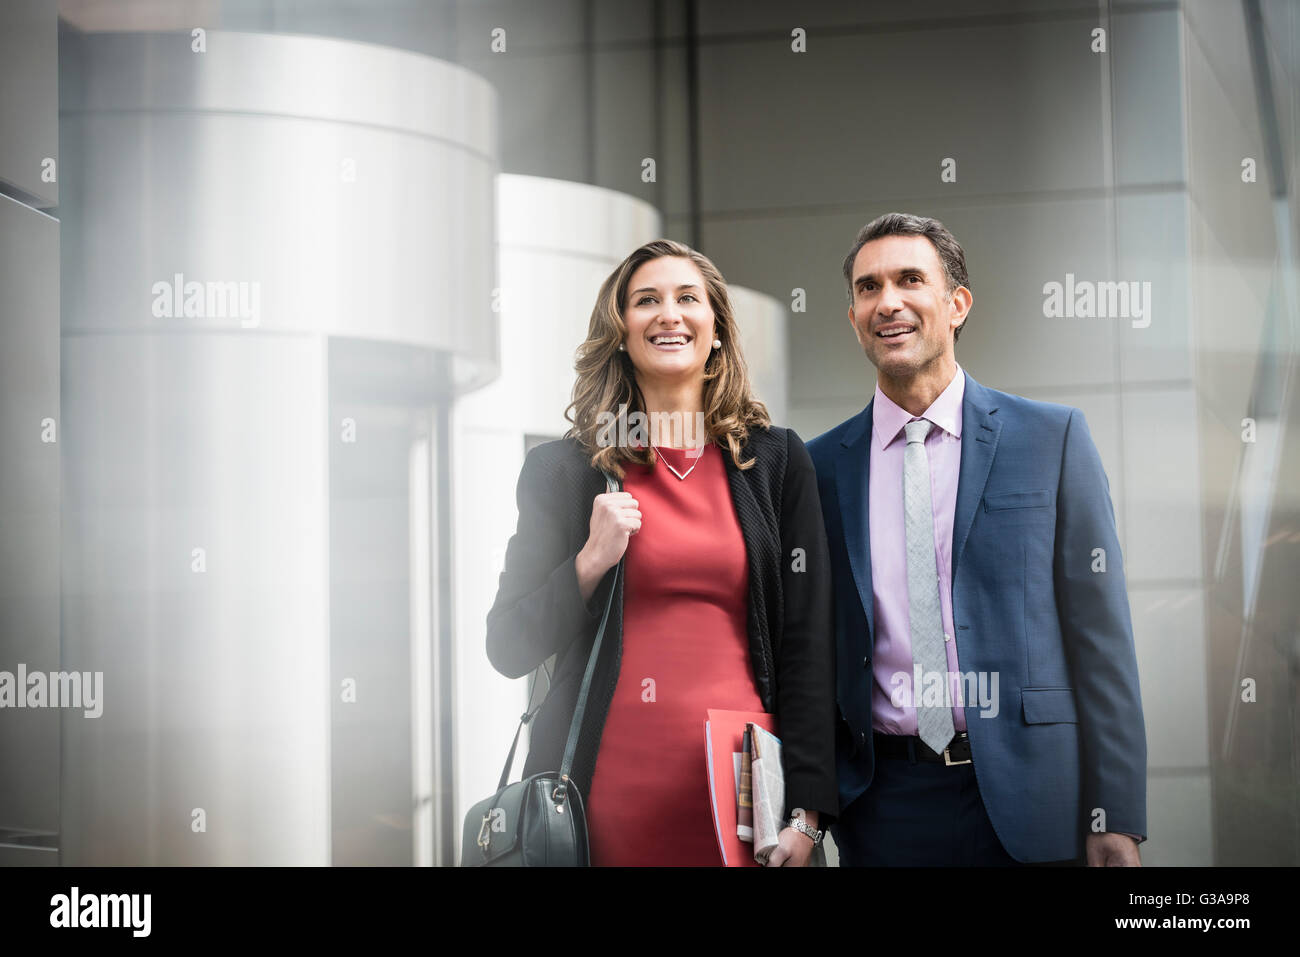 Smiling corporate businessman and businesswoman outside building Stock Photo